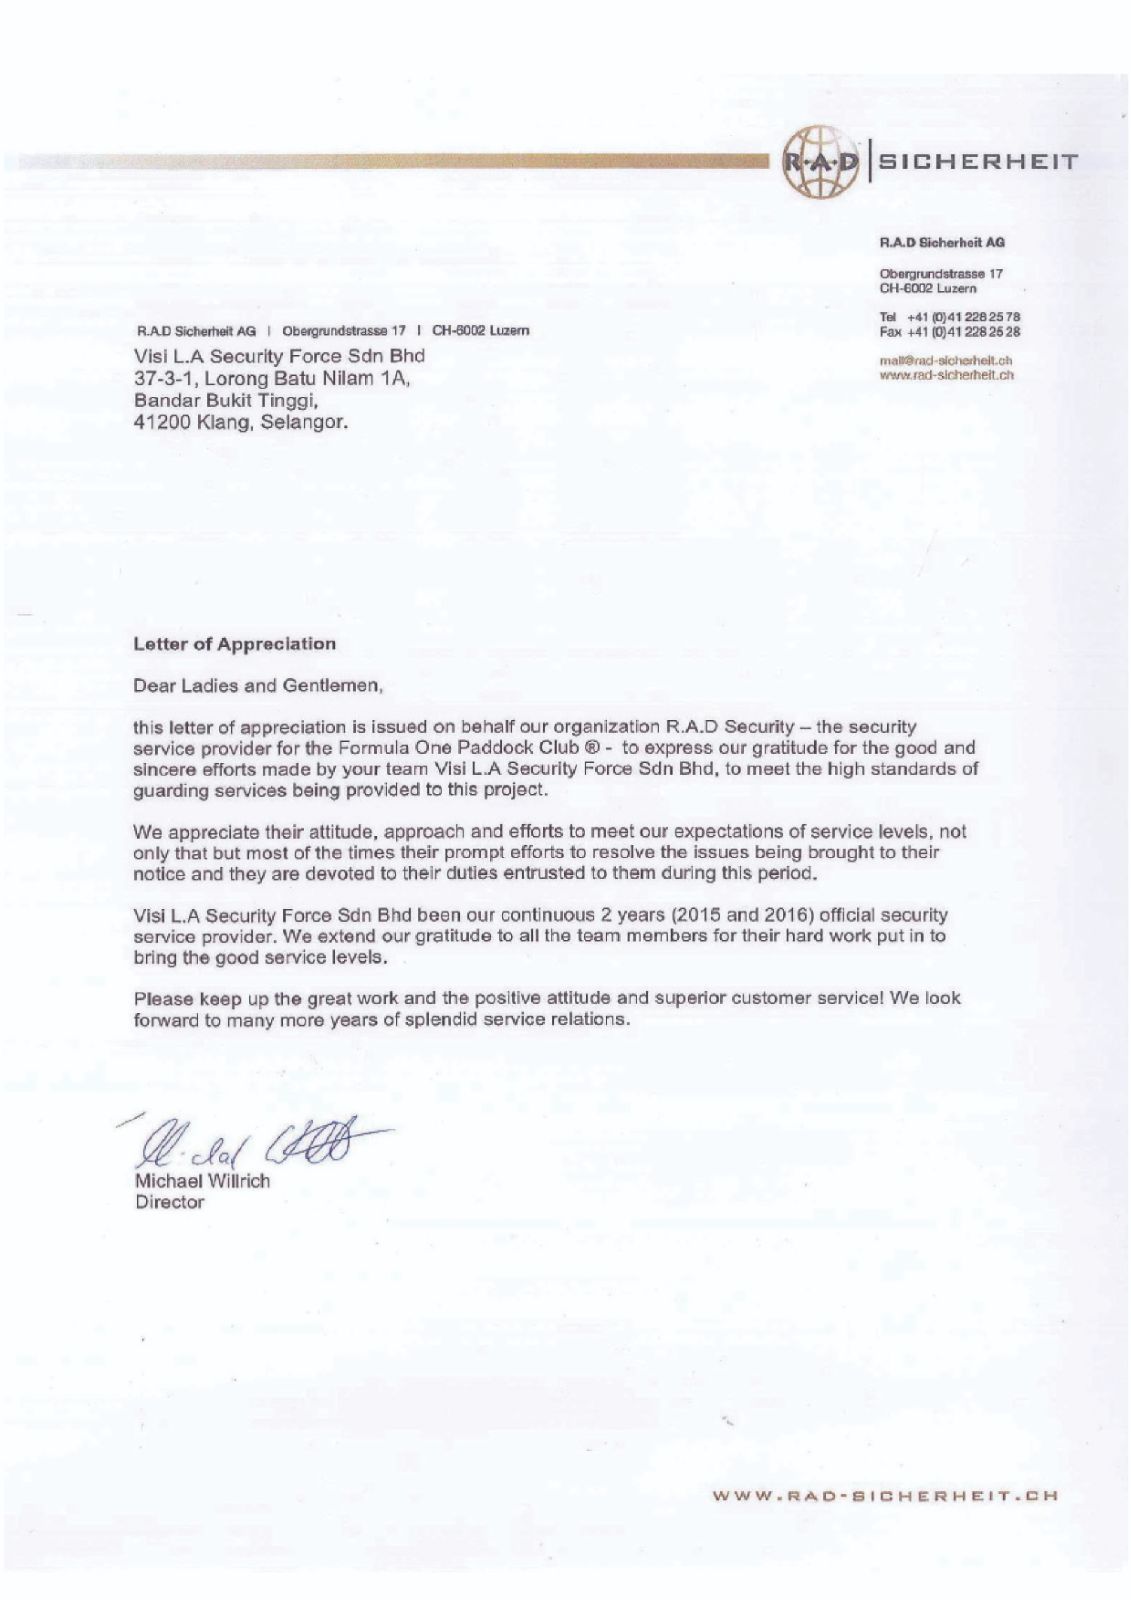 Letter of Appreciation from R.A.D Security, Germany & Visi L.A. Security Force Sdn Bhd